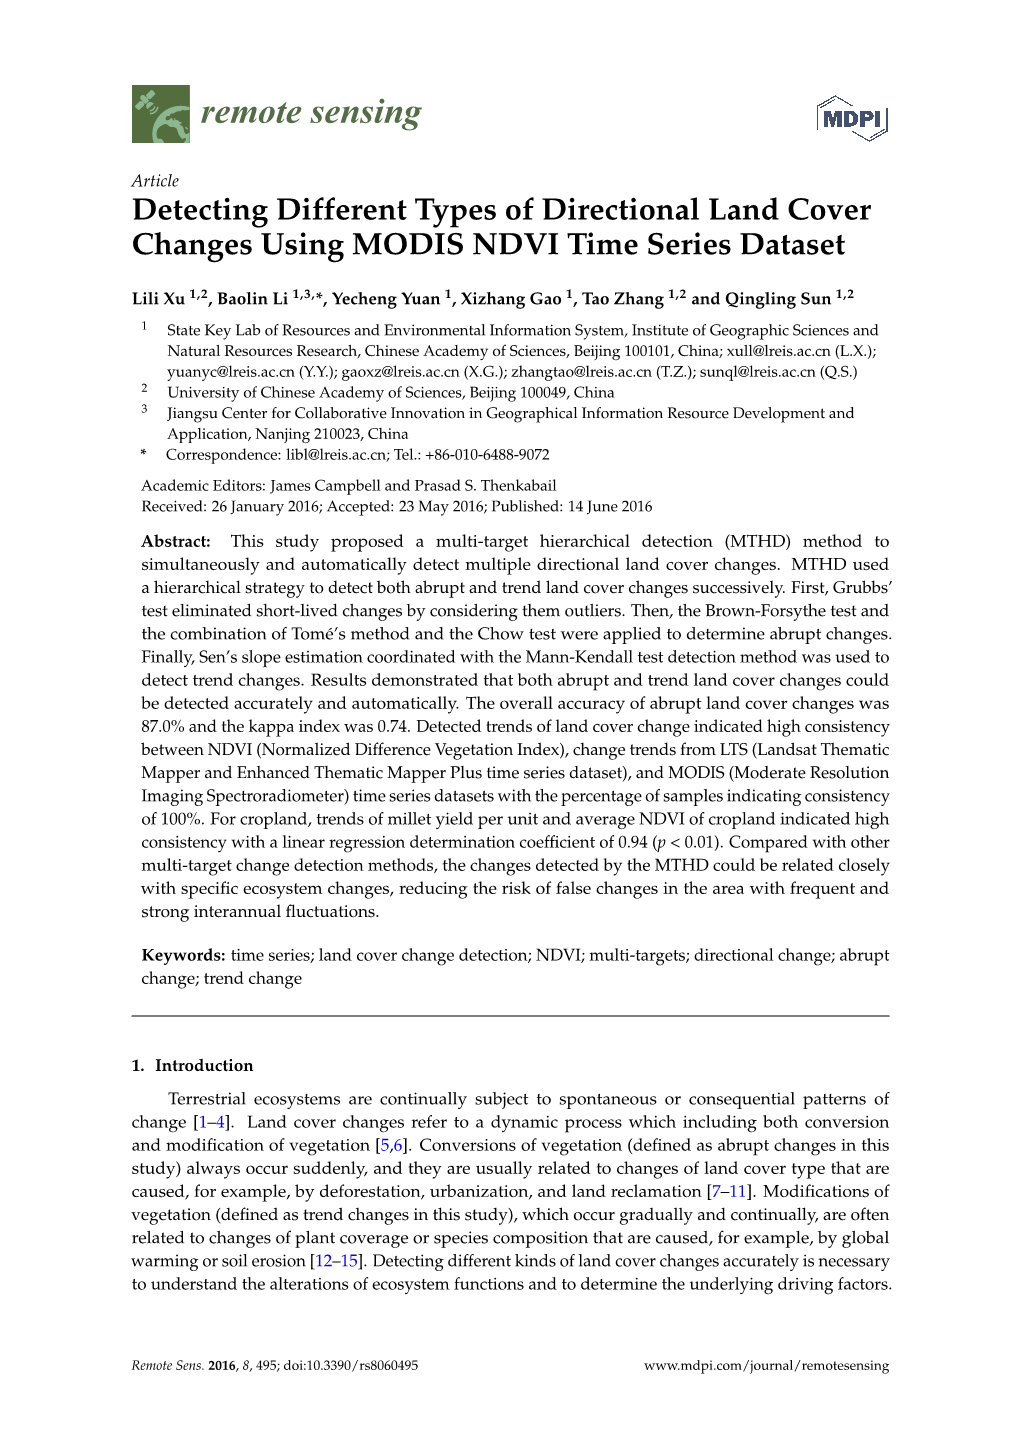 Detecting Different Types of Directional Land Cover Changes Using MODIS NDVI Time Series Dataset